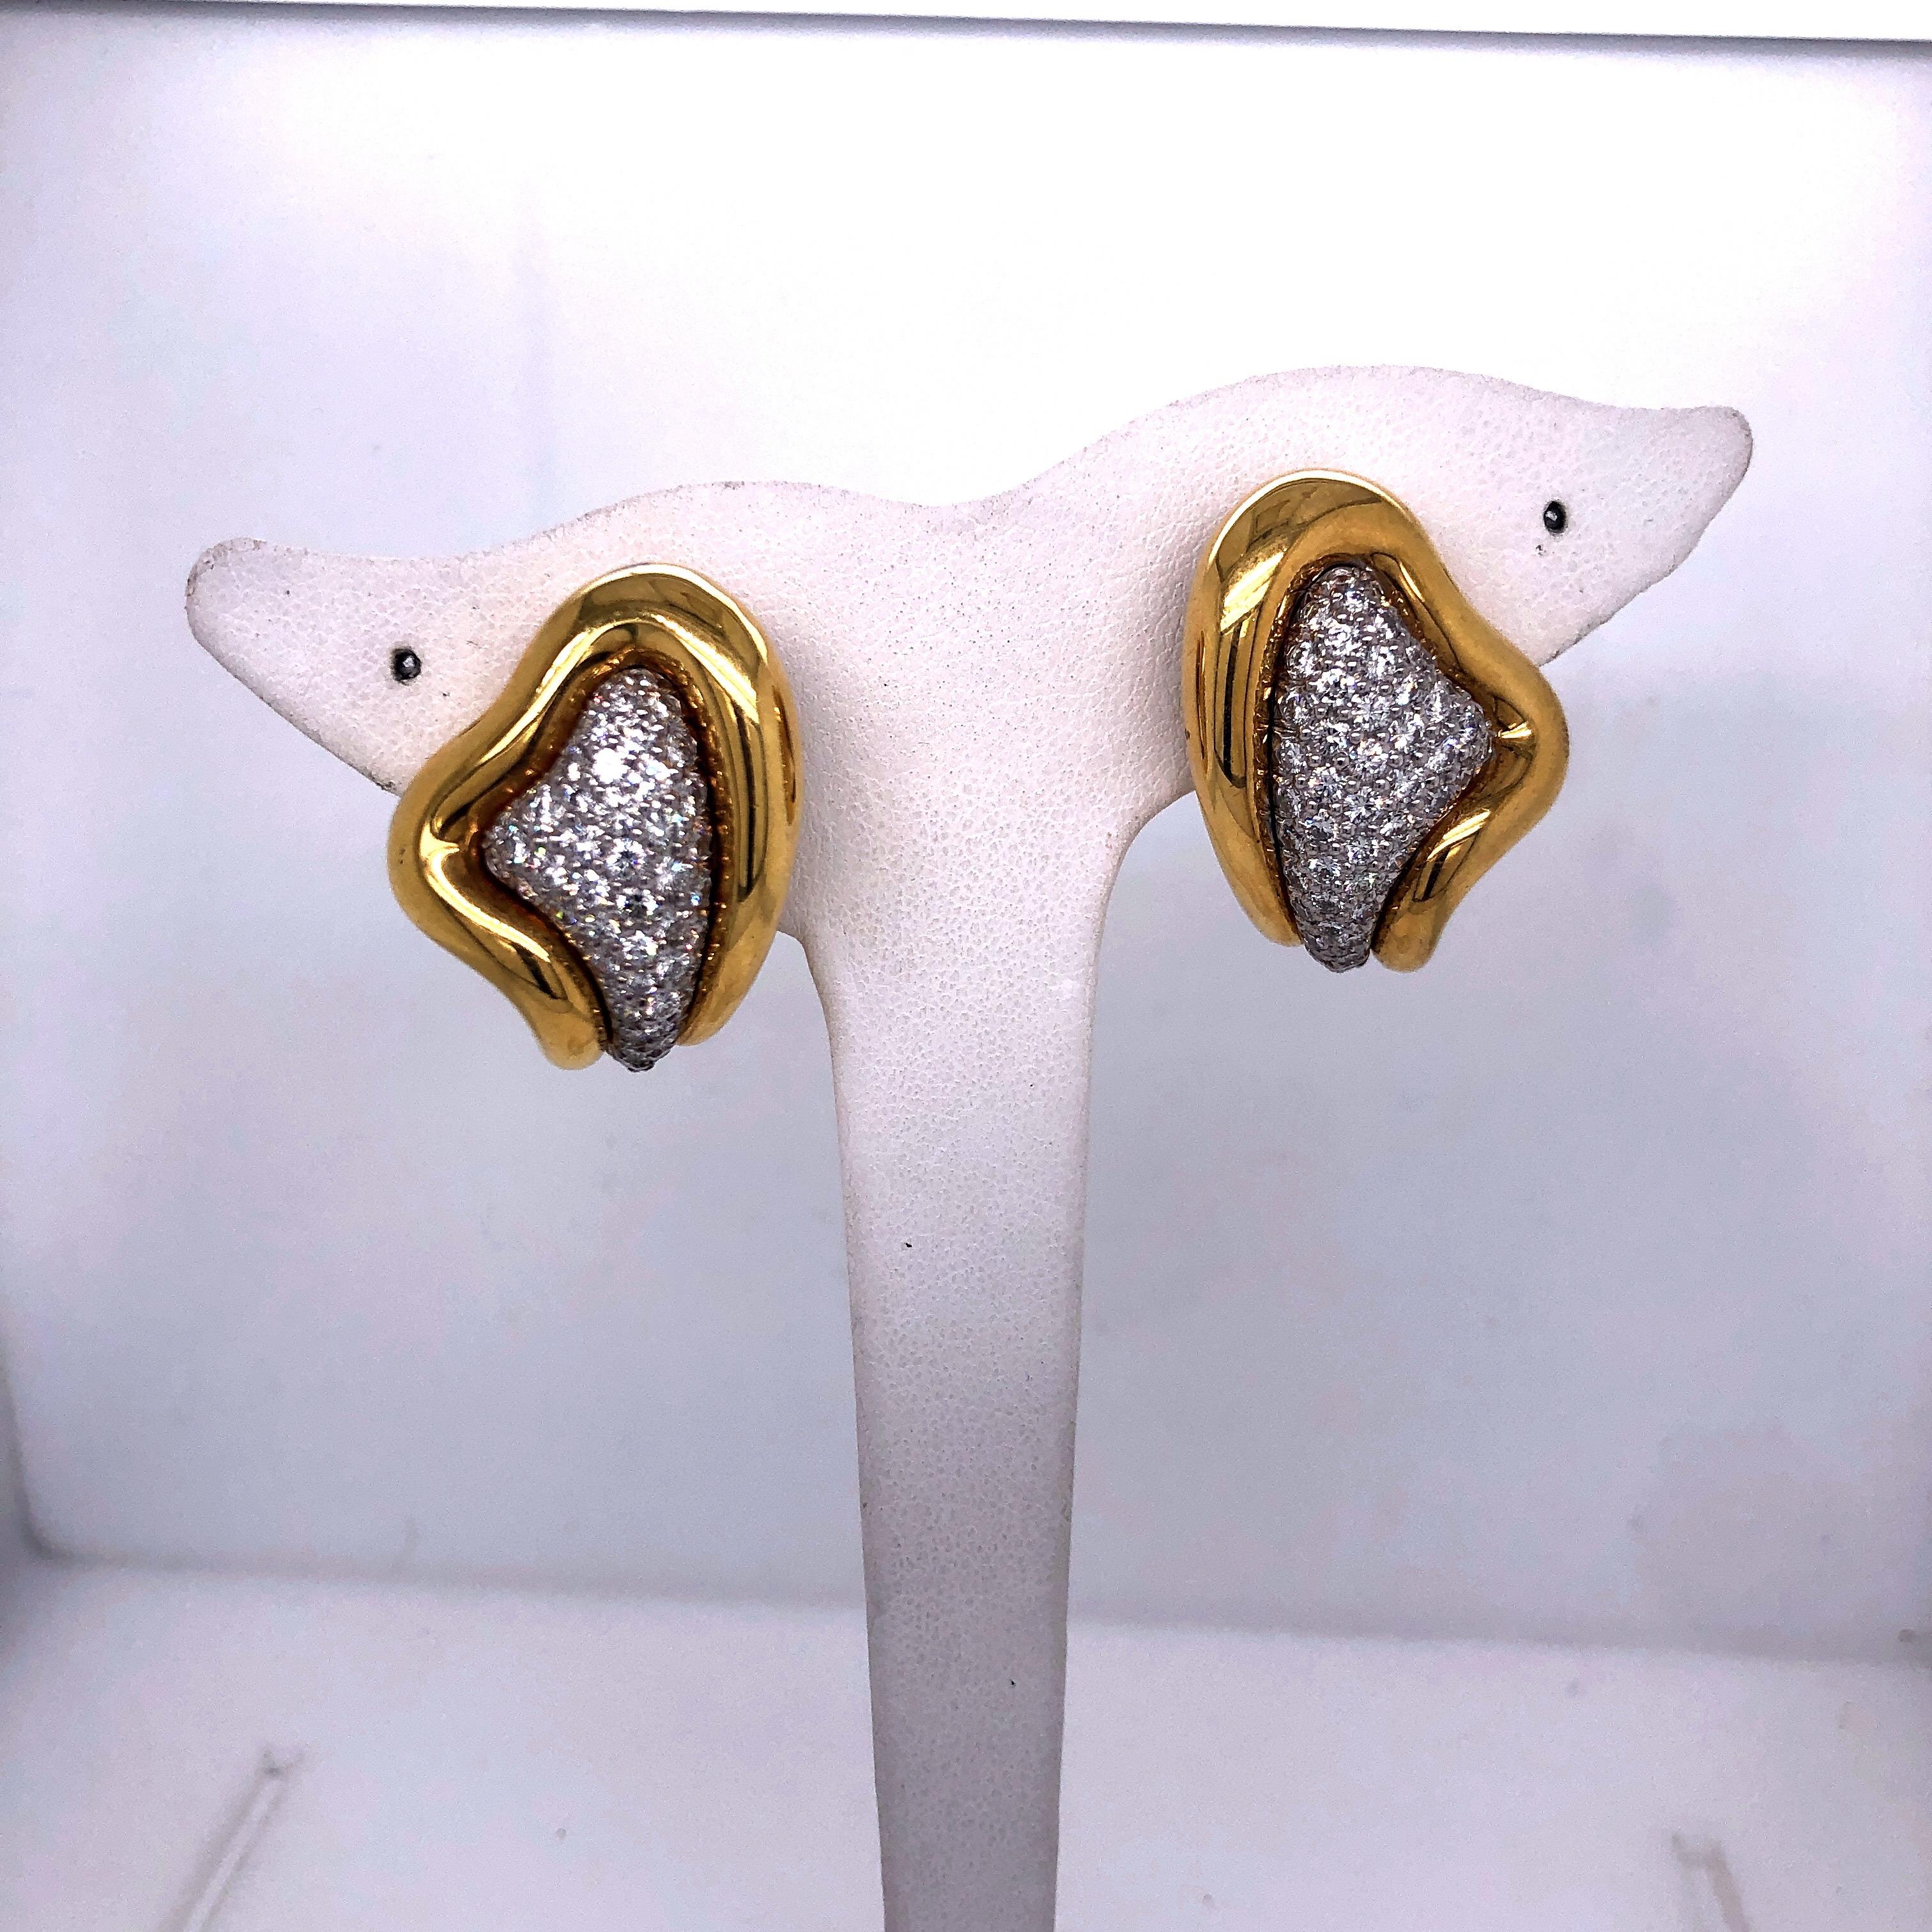 18K Yellow Gold and pave diamond Earrings.  Clip on Earrings from Kurt Wayne.  A timeless look.  Stamped KW and 750.